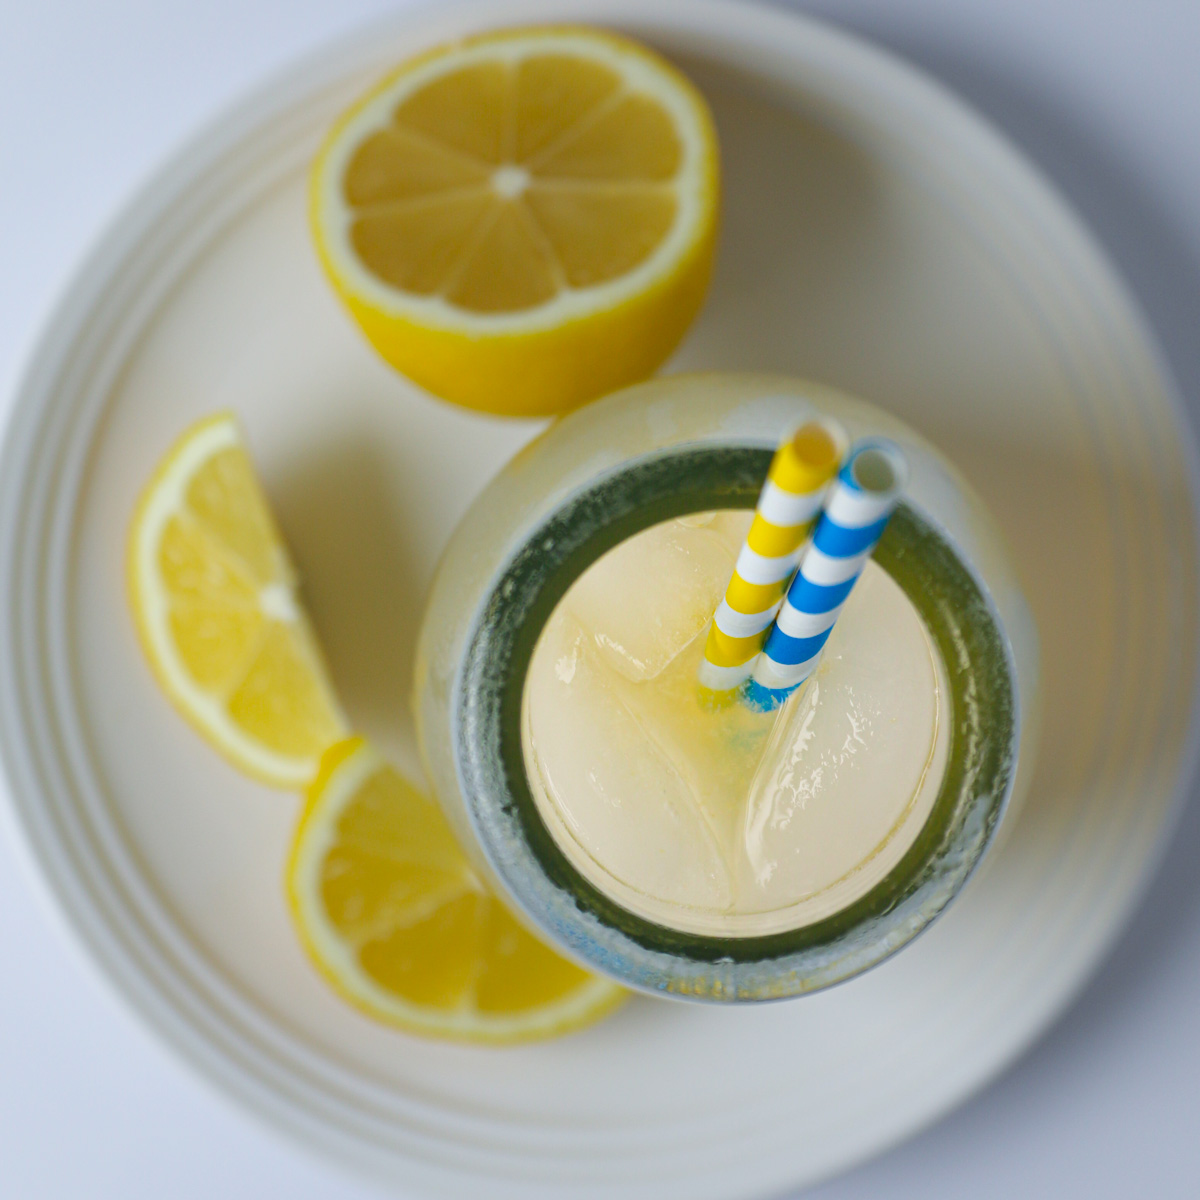 overhead shot of glass of lemonade on plate with cut lemon and wedges.